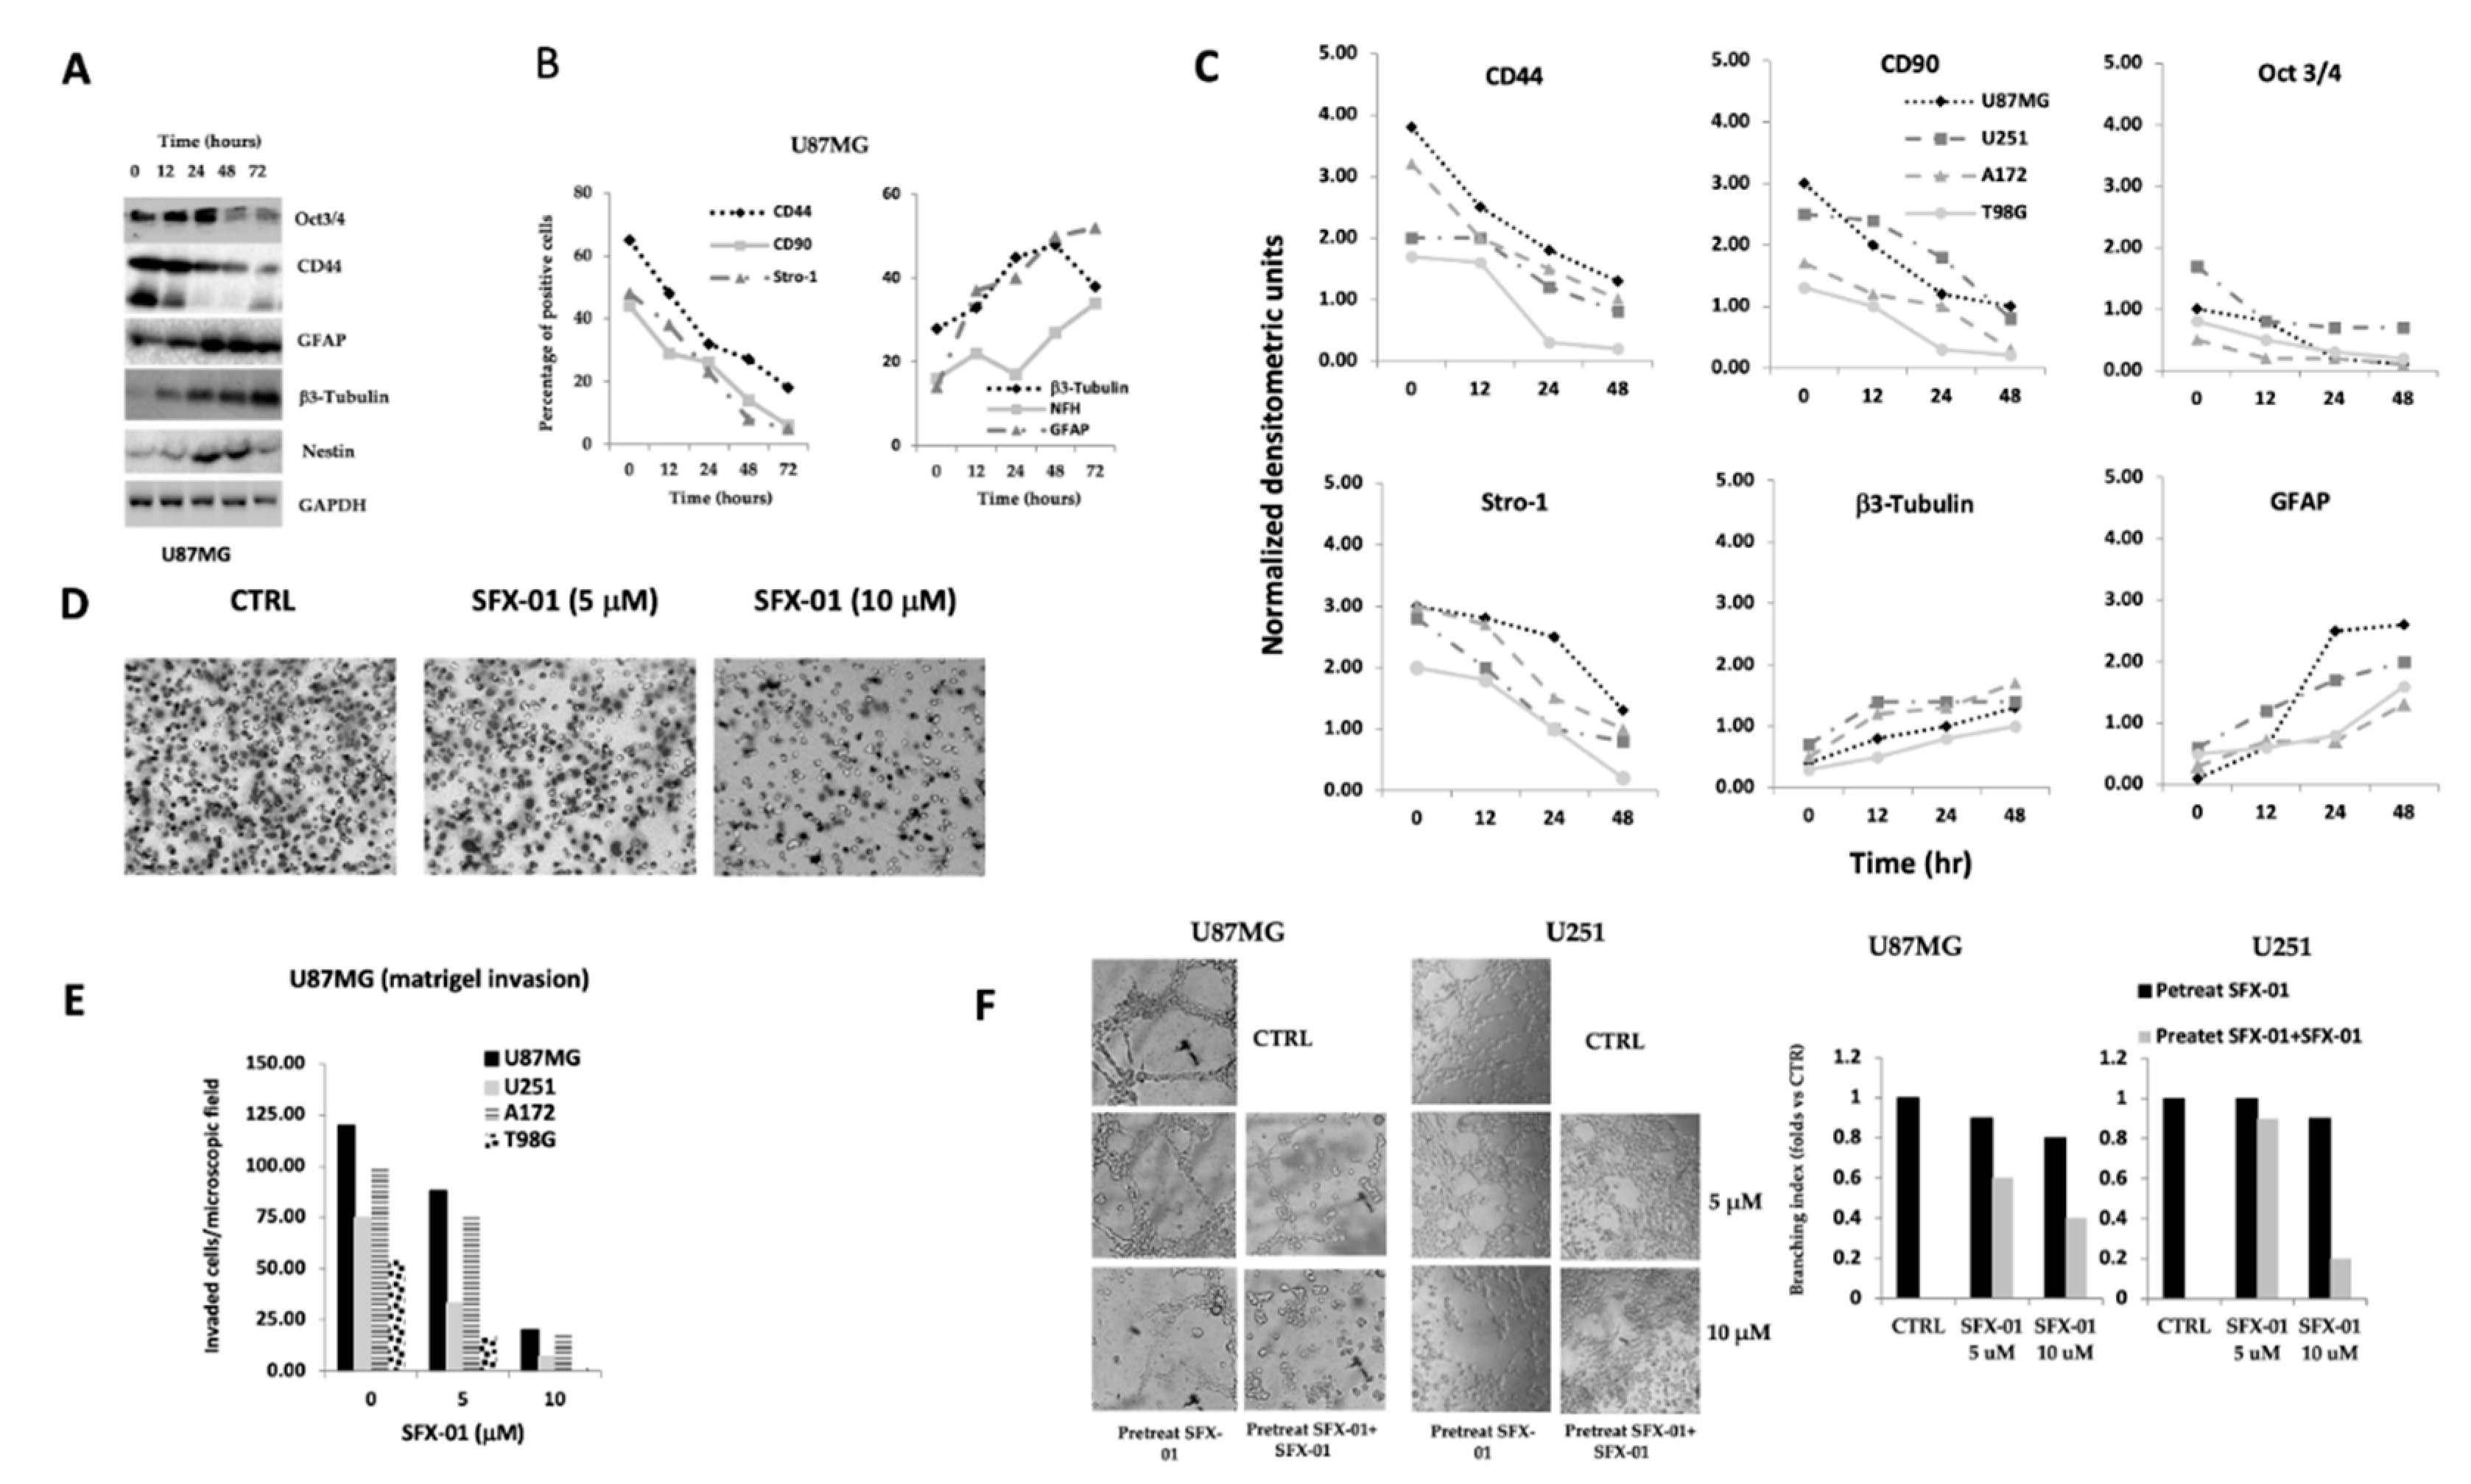 Pharmaceuticals | Free Full-Text | Multiple Antitumor Molecular Mechanisms  Are Activated by a Fully Synthetic and Stabilized Pharmaceutical Product  Delivering the Active Compound Sulforaphane (SFX-01) in Preclinical Model  of Human Glioblastoma